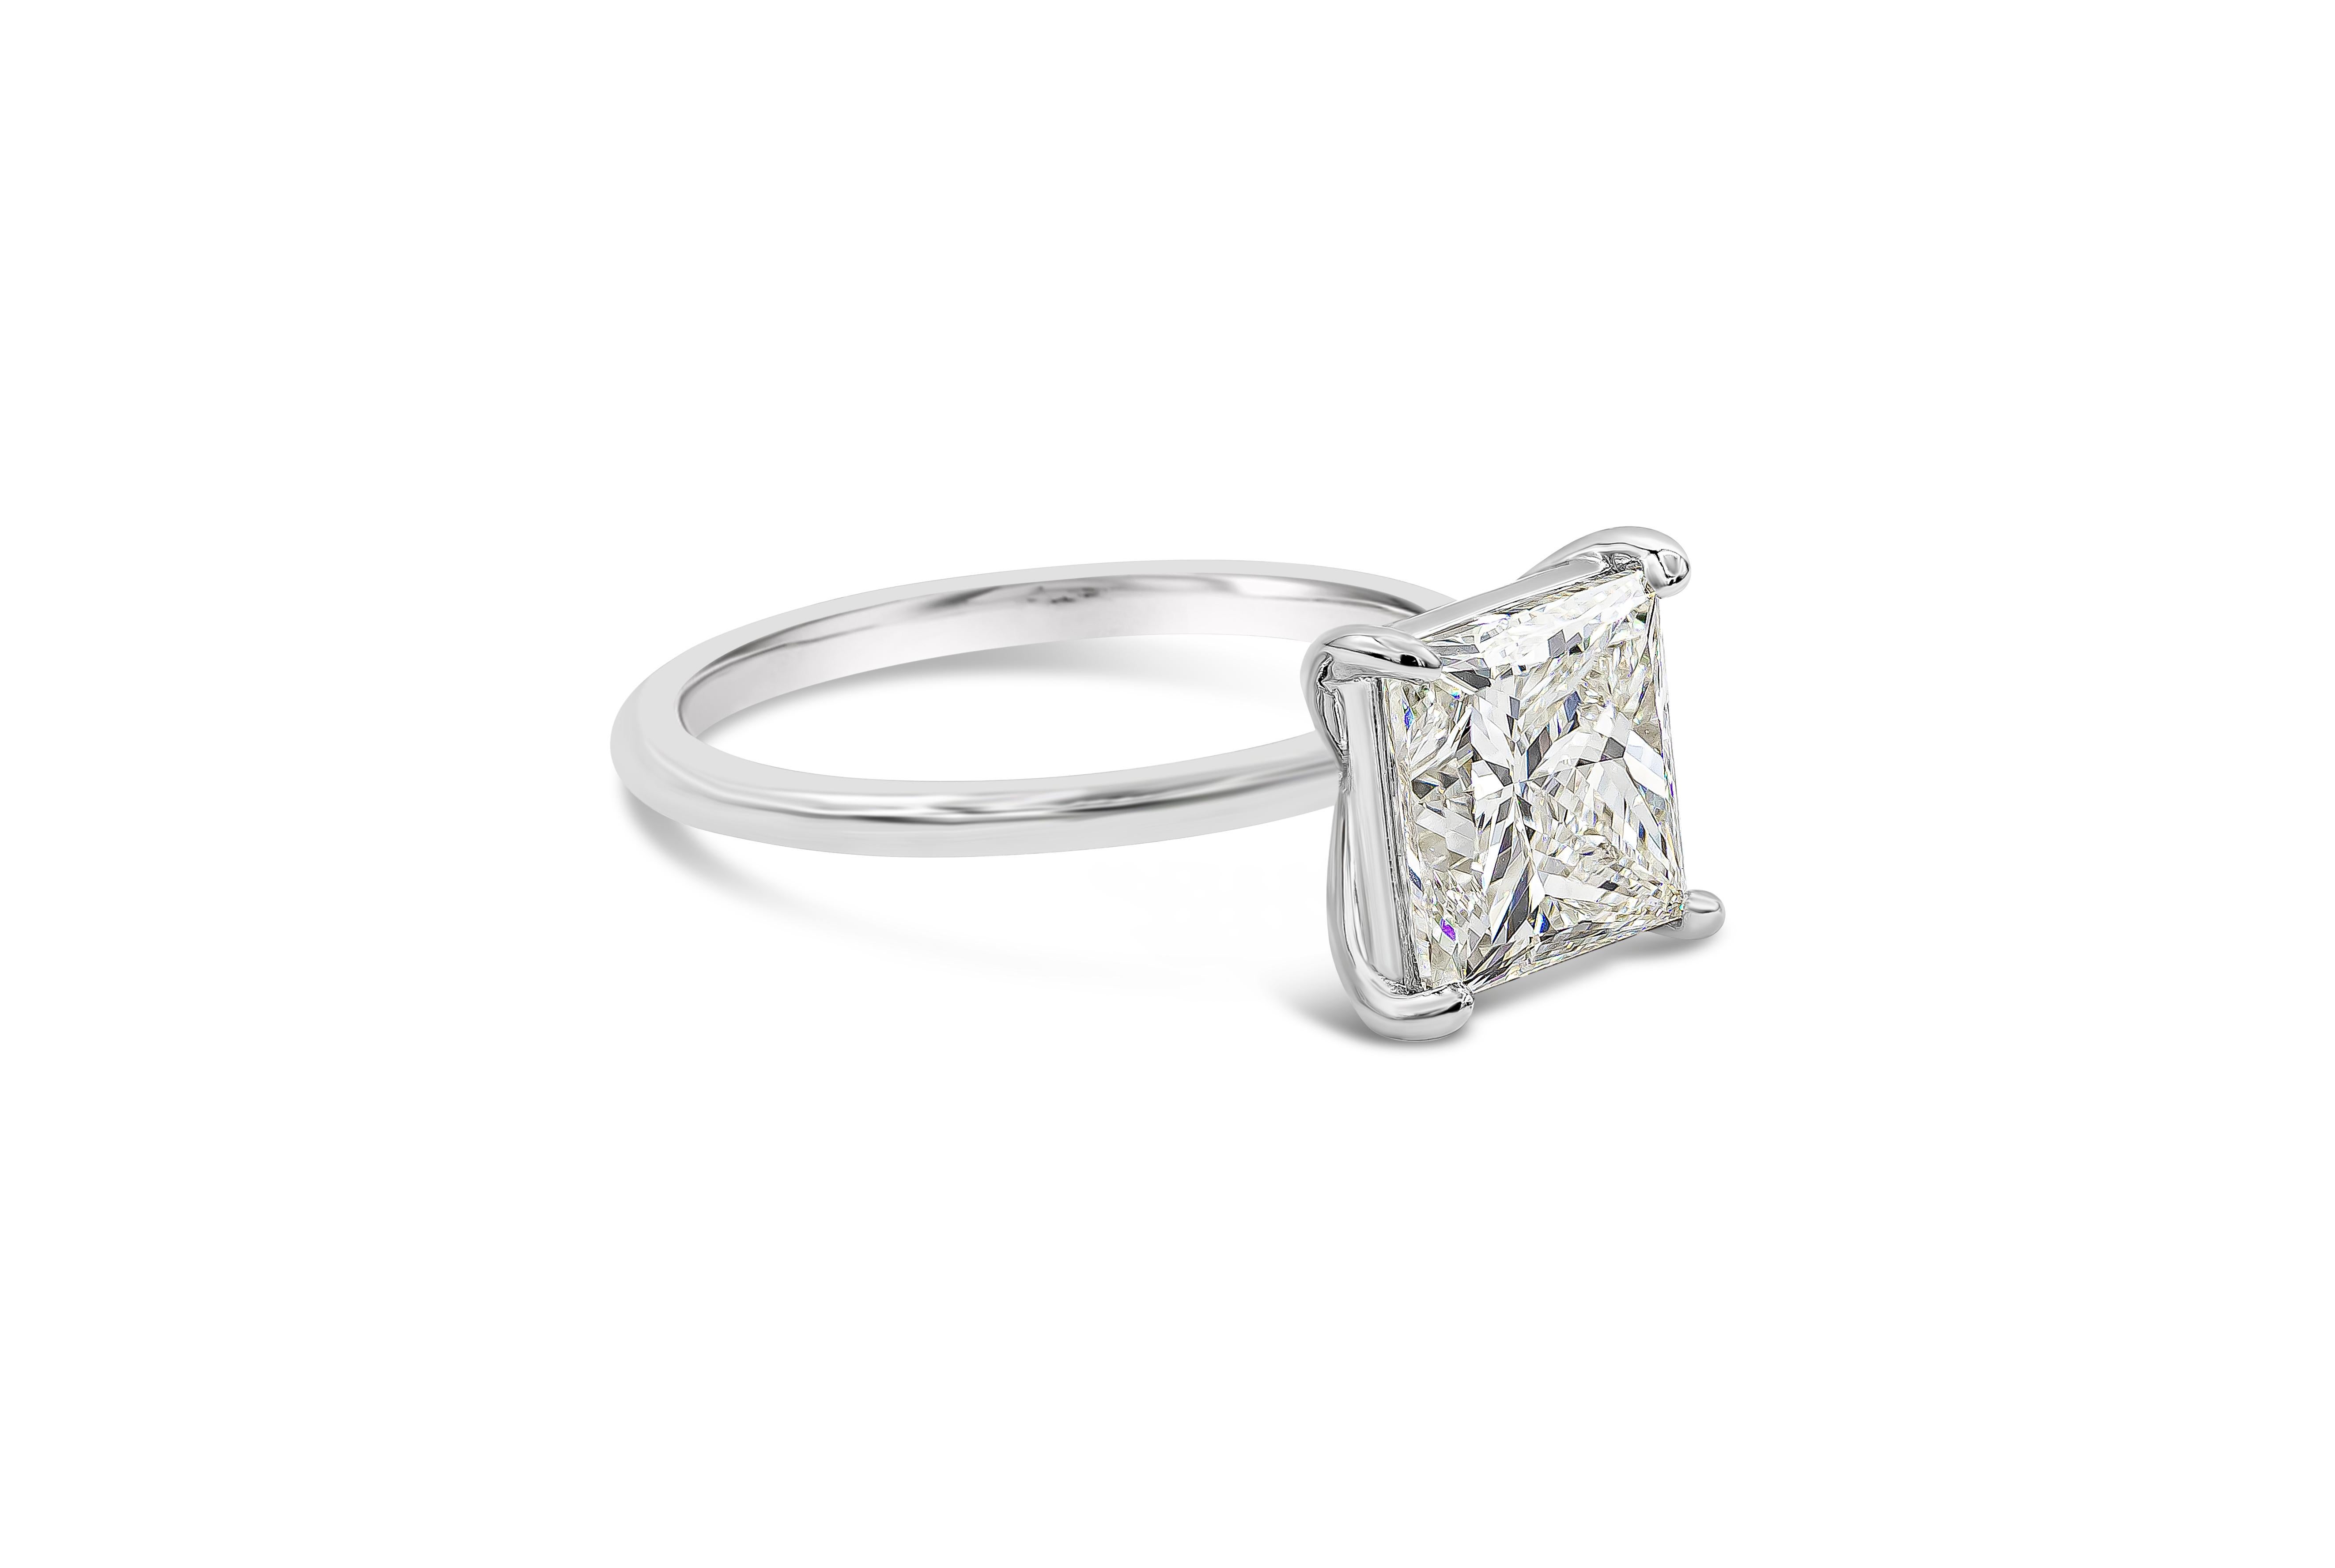 A timeless solitaire engagement ring style. Features a 3.06 carat princess cut diamond certified by GIA as I color, VS1 clarity, set in a classic four-prong mounting made in platinum. Size 6.5 US.

Style available in different price ranges. Prices